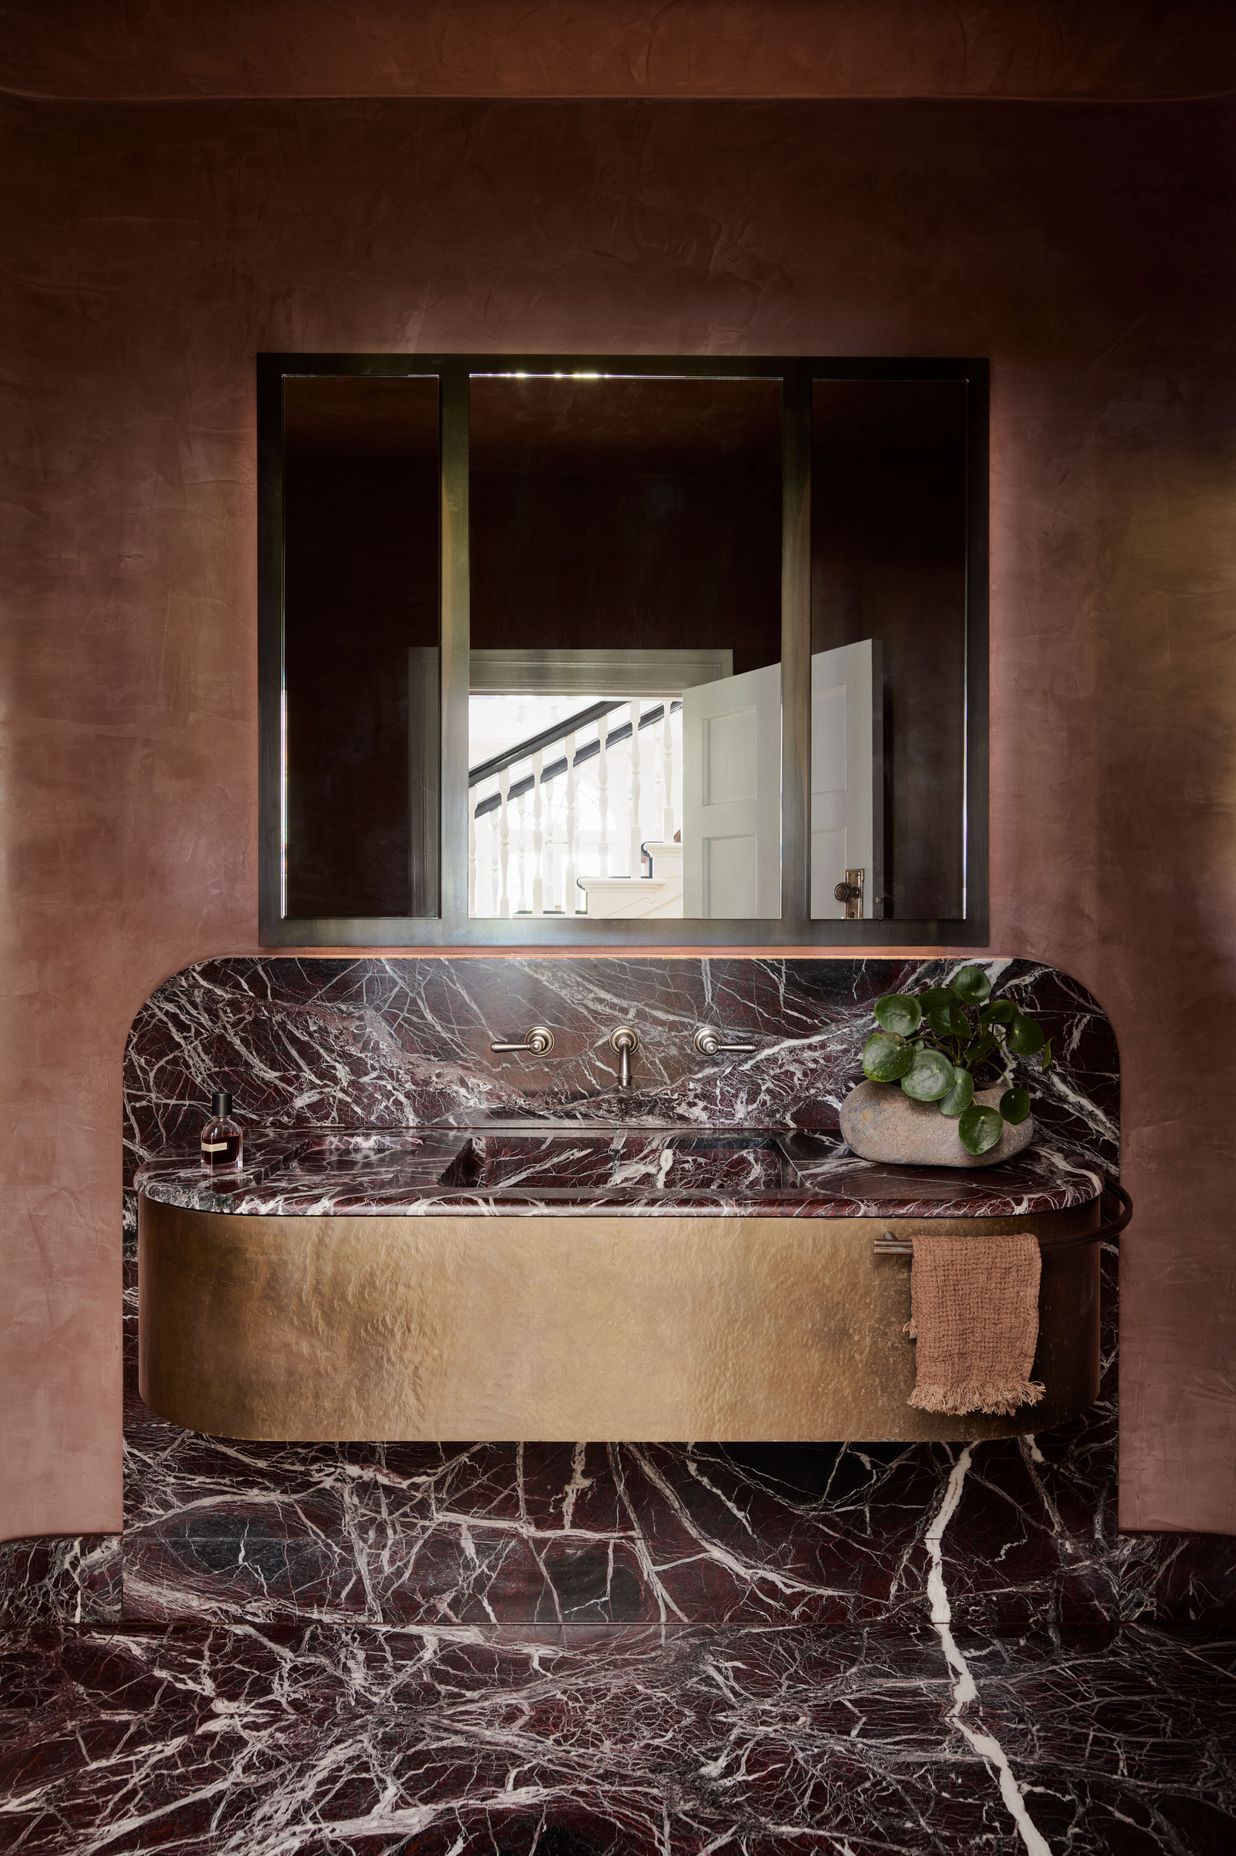 The bathroom is a great place to add texture. This bathroom features a terracotta plaster finish that enhances the tones in the stone floor and vanity.